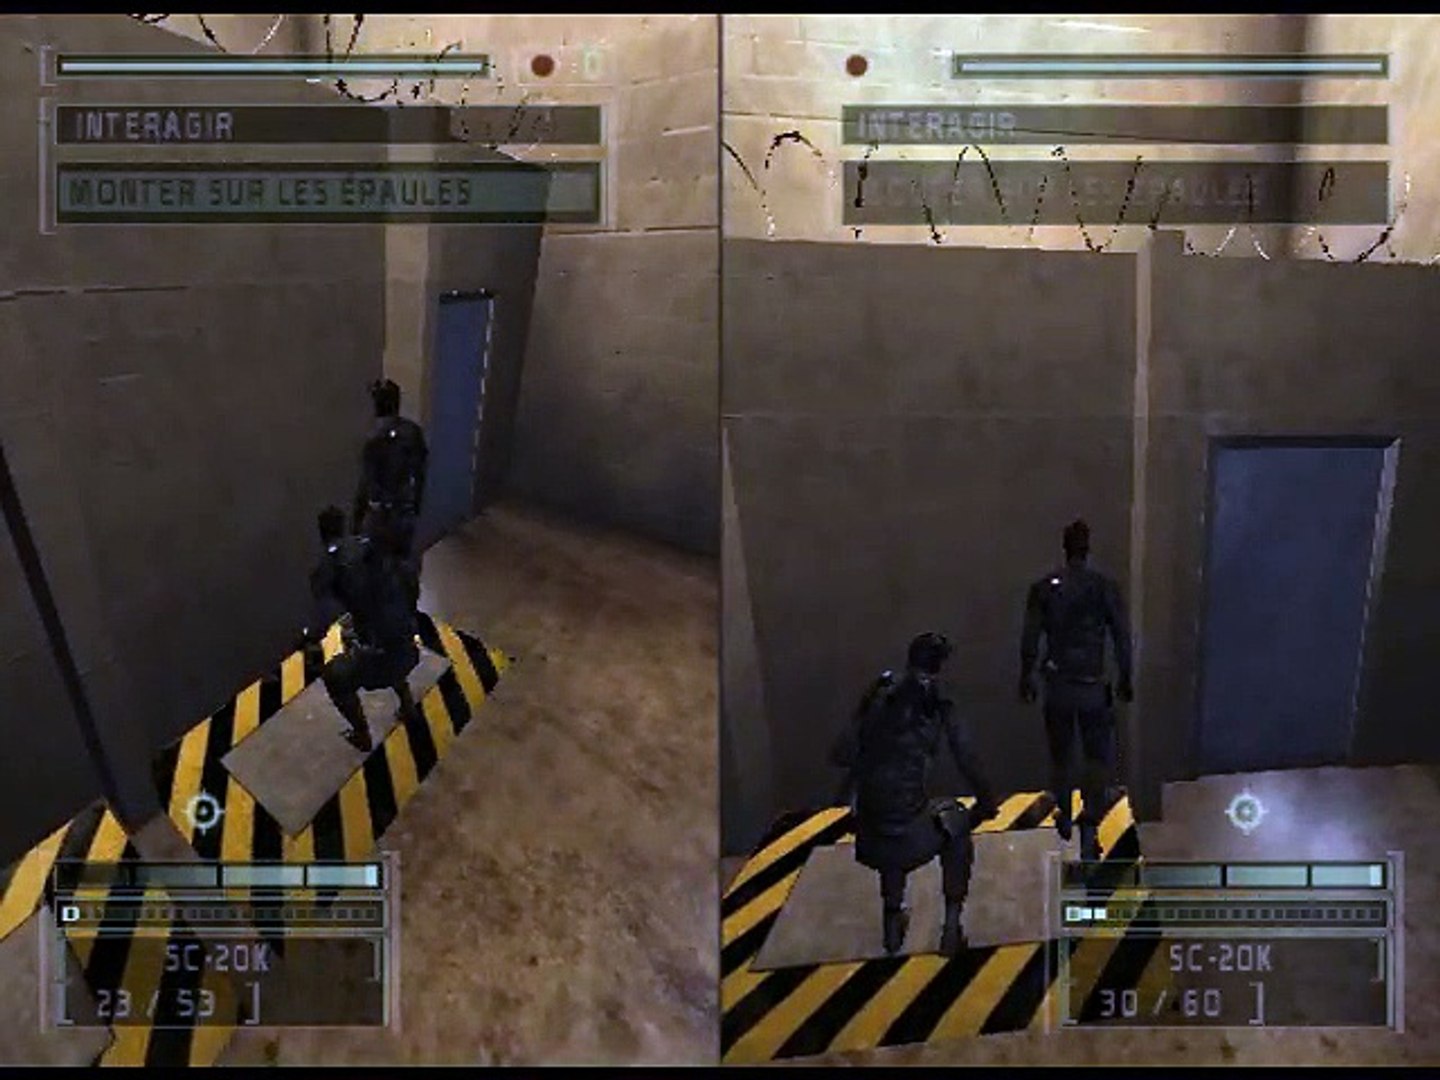 Tom Clancy's Splinter Cell: Chaos Theory (Gamecube) 